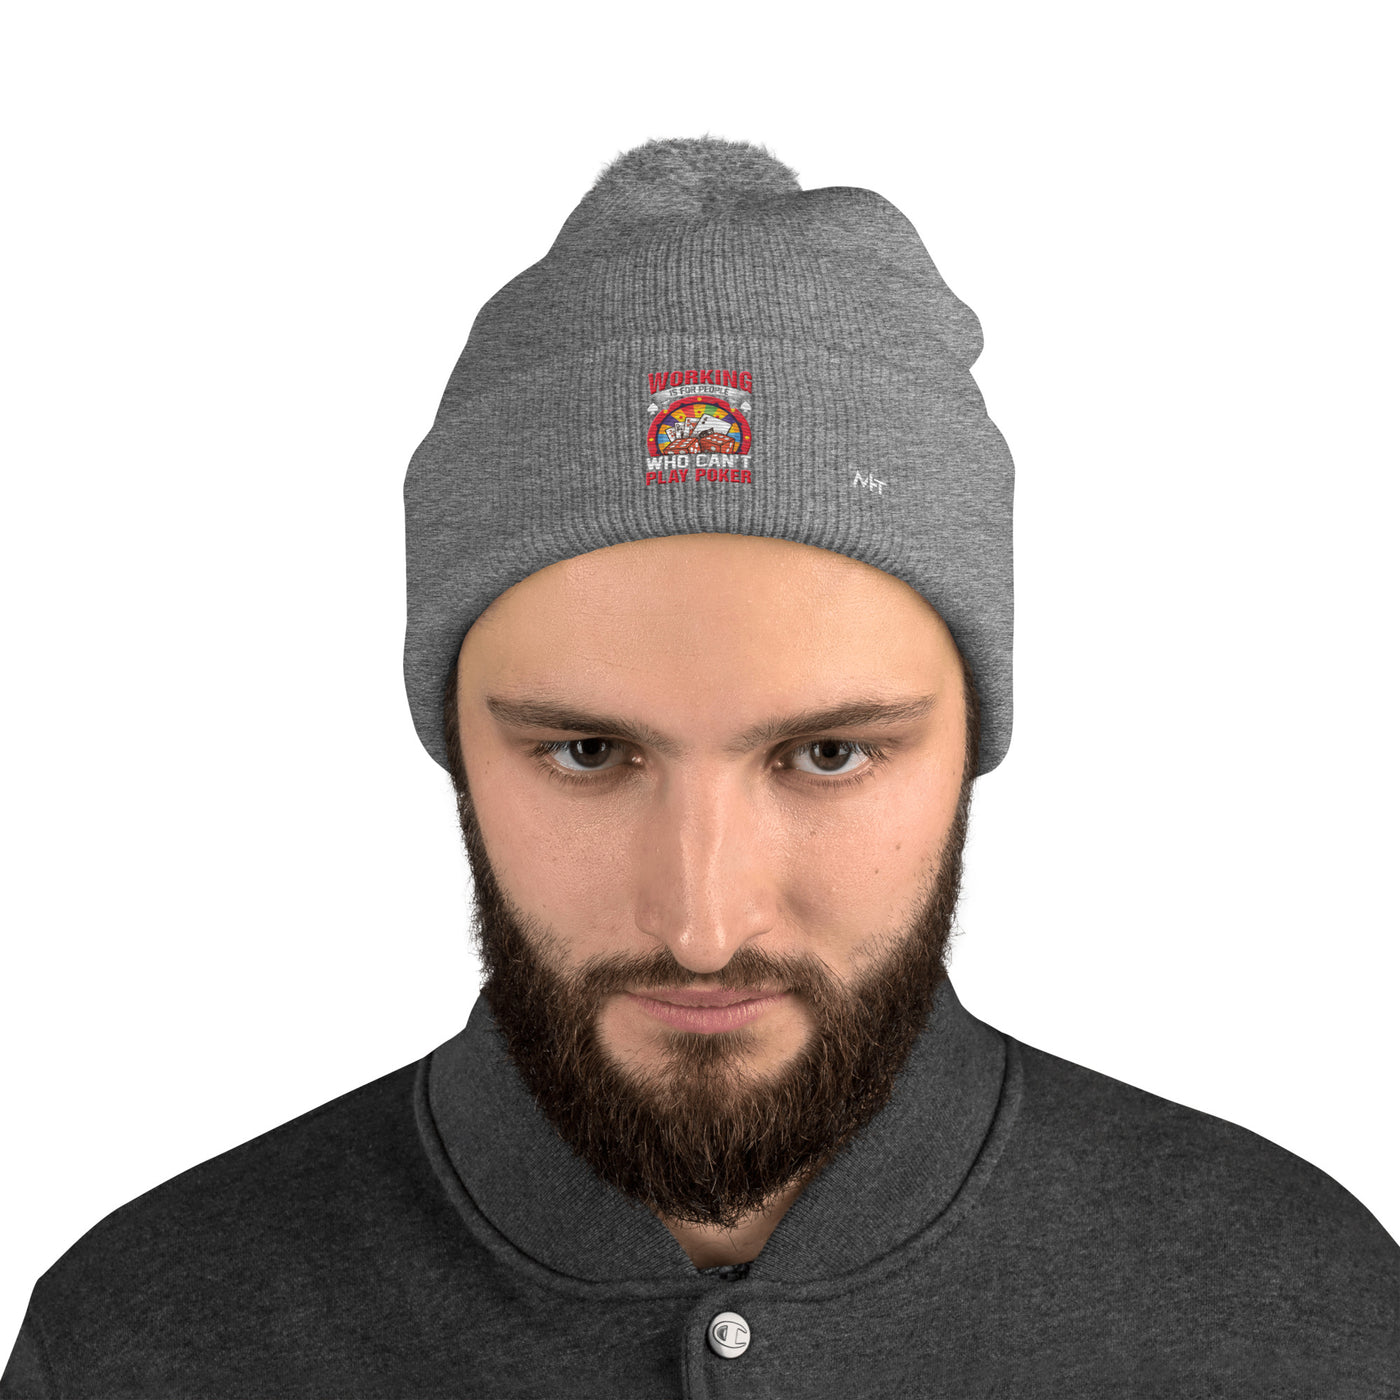 Working is for people for Who can't Play Poker - Pom-Pom Beanie